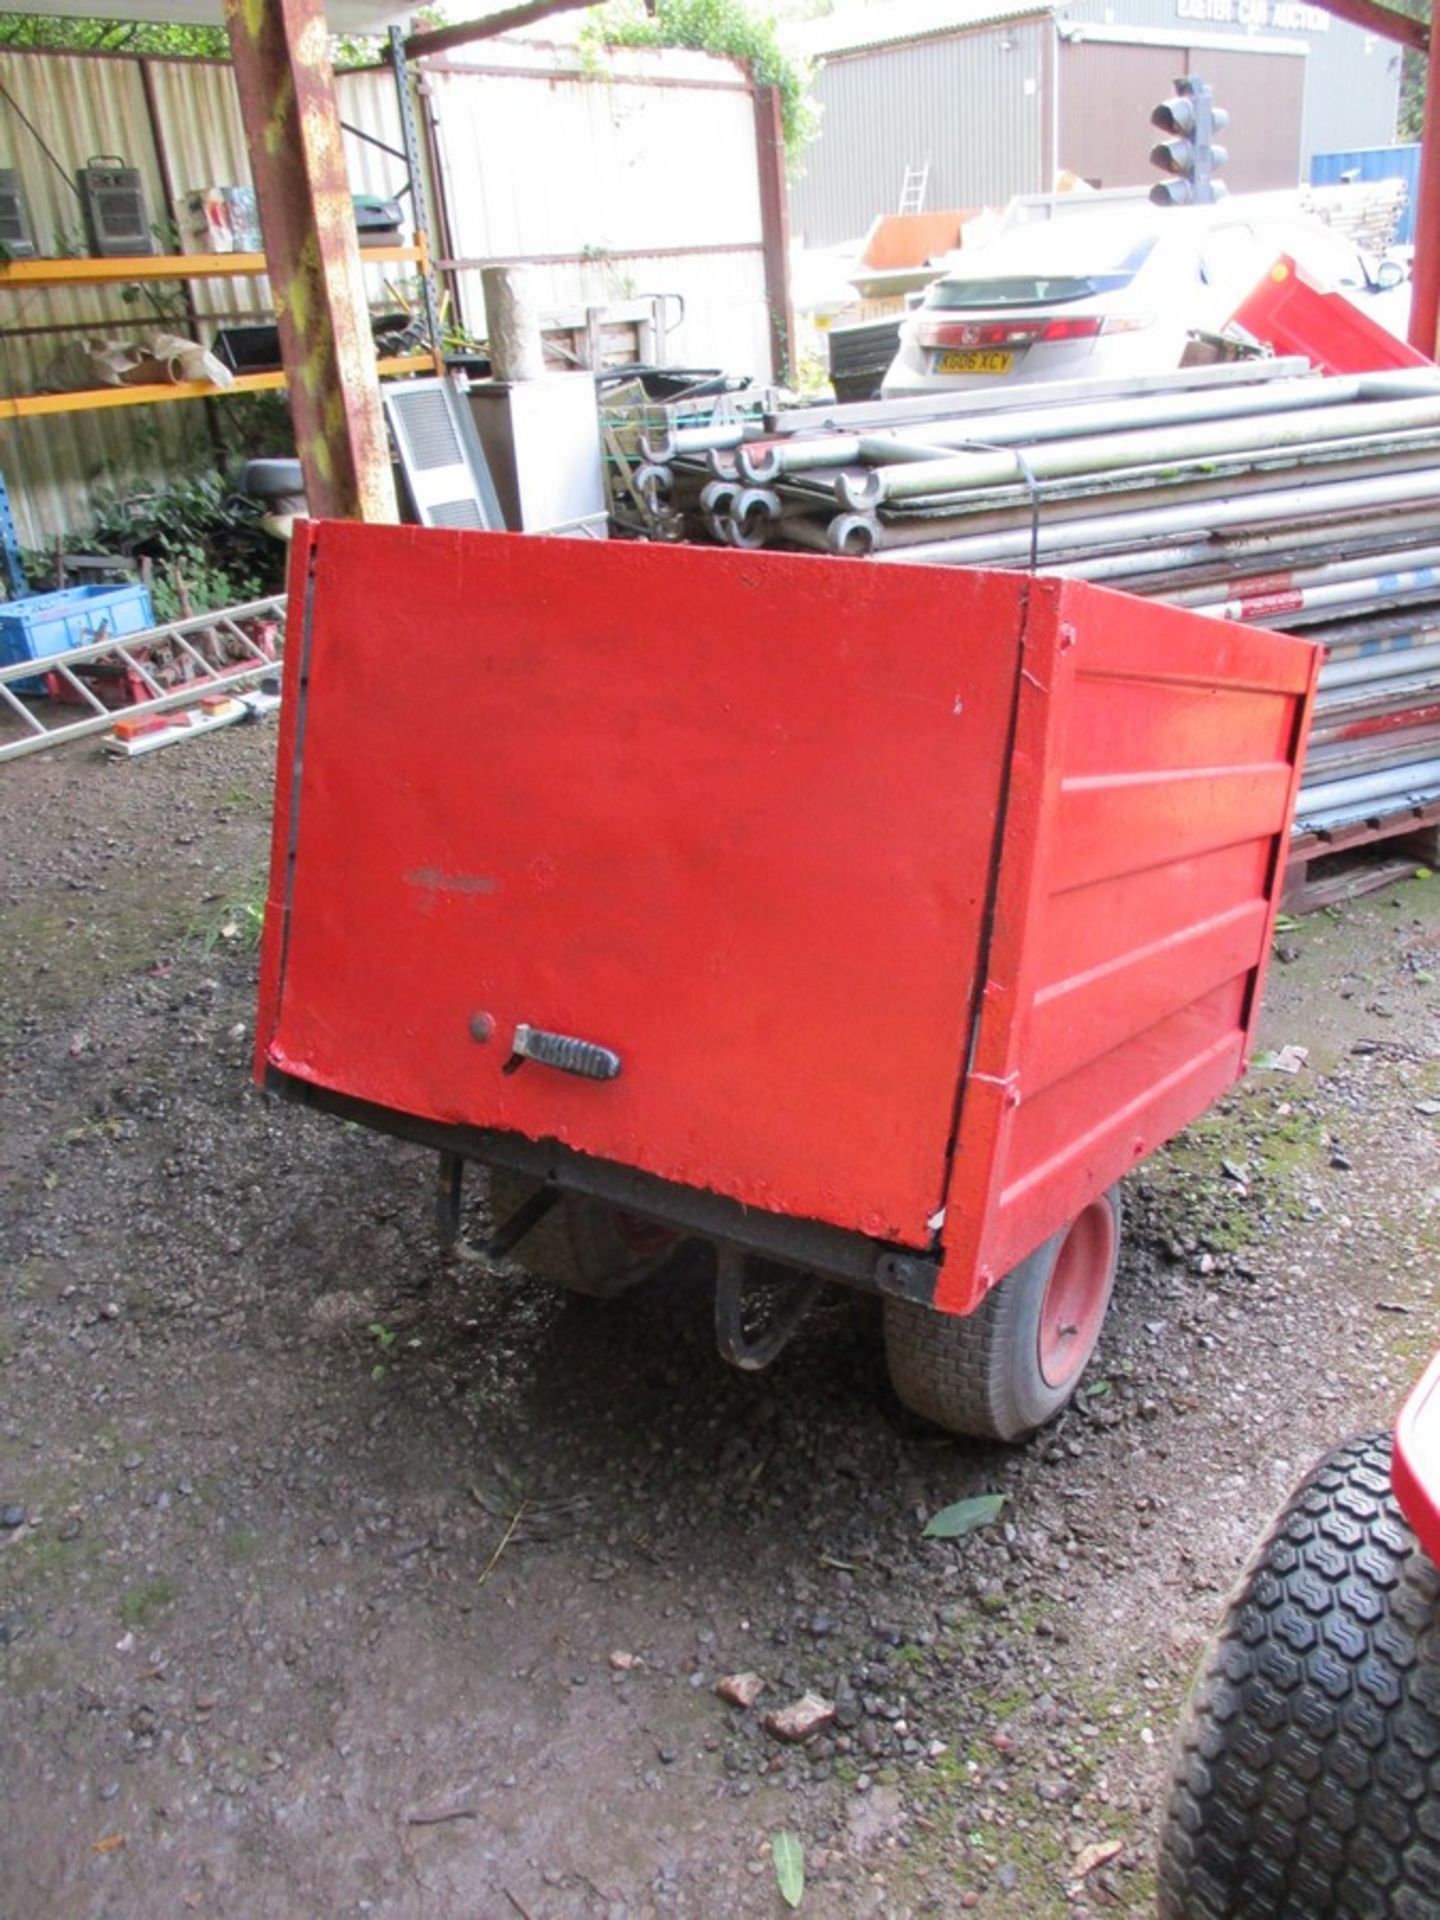 COUNTAX GARDEN TRACTOR C.W TIPPING TRAILER - Image 7 of 8